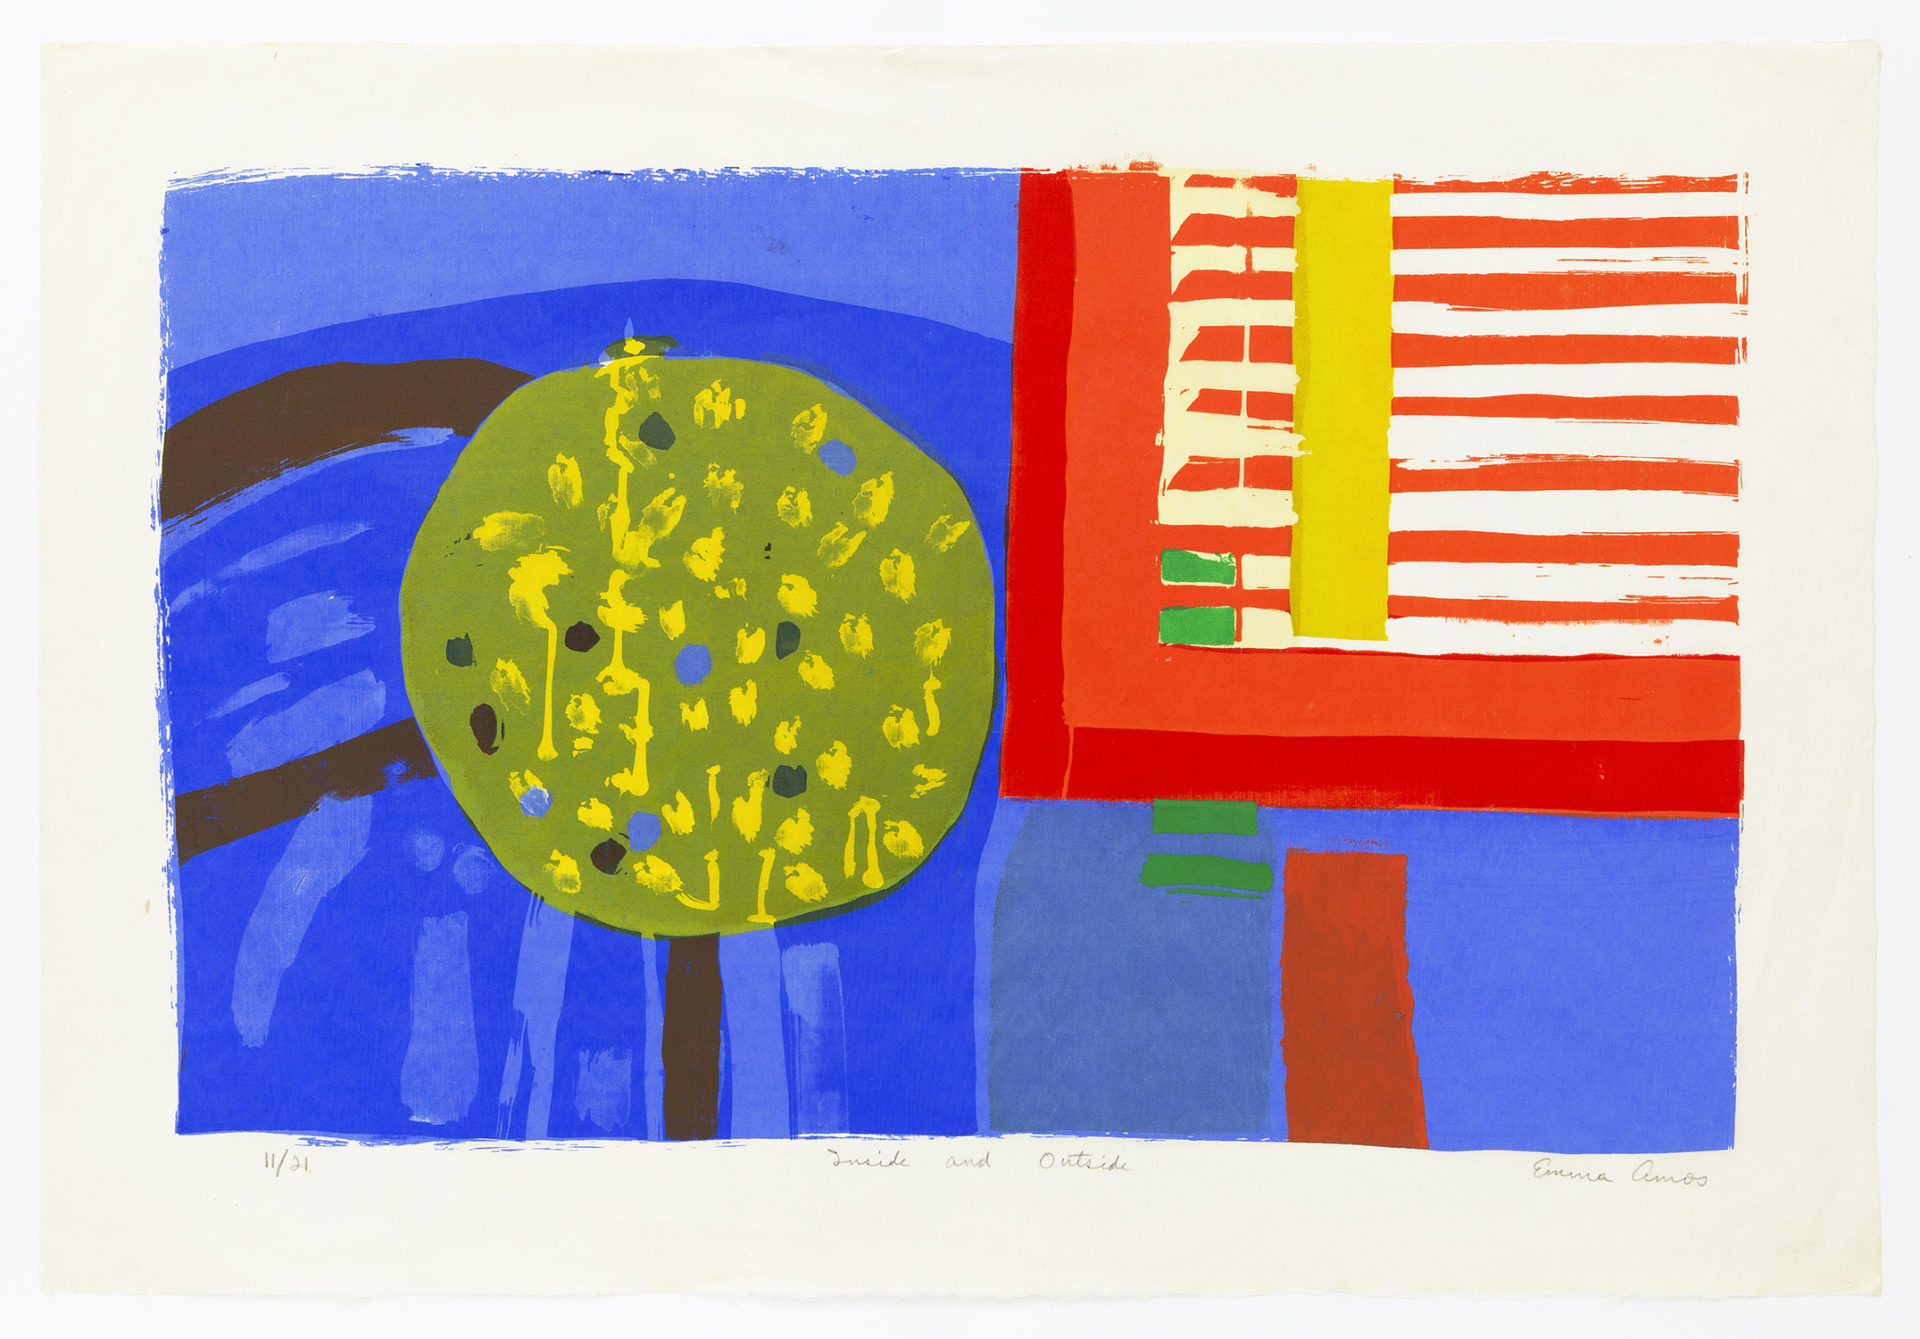 Inside and Outside, 1966 Silkscreen 25 x 37 inches (63.5 x 94 cm) Edition of 21